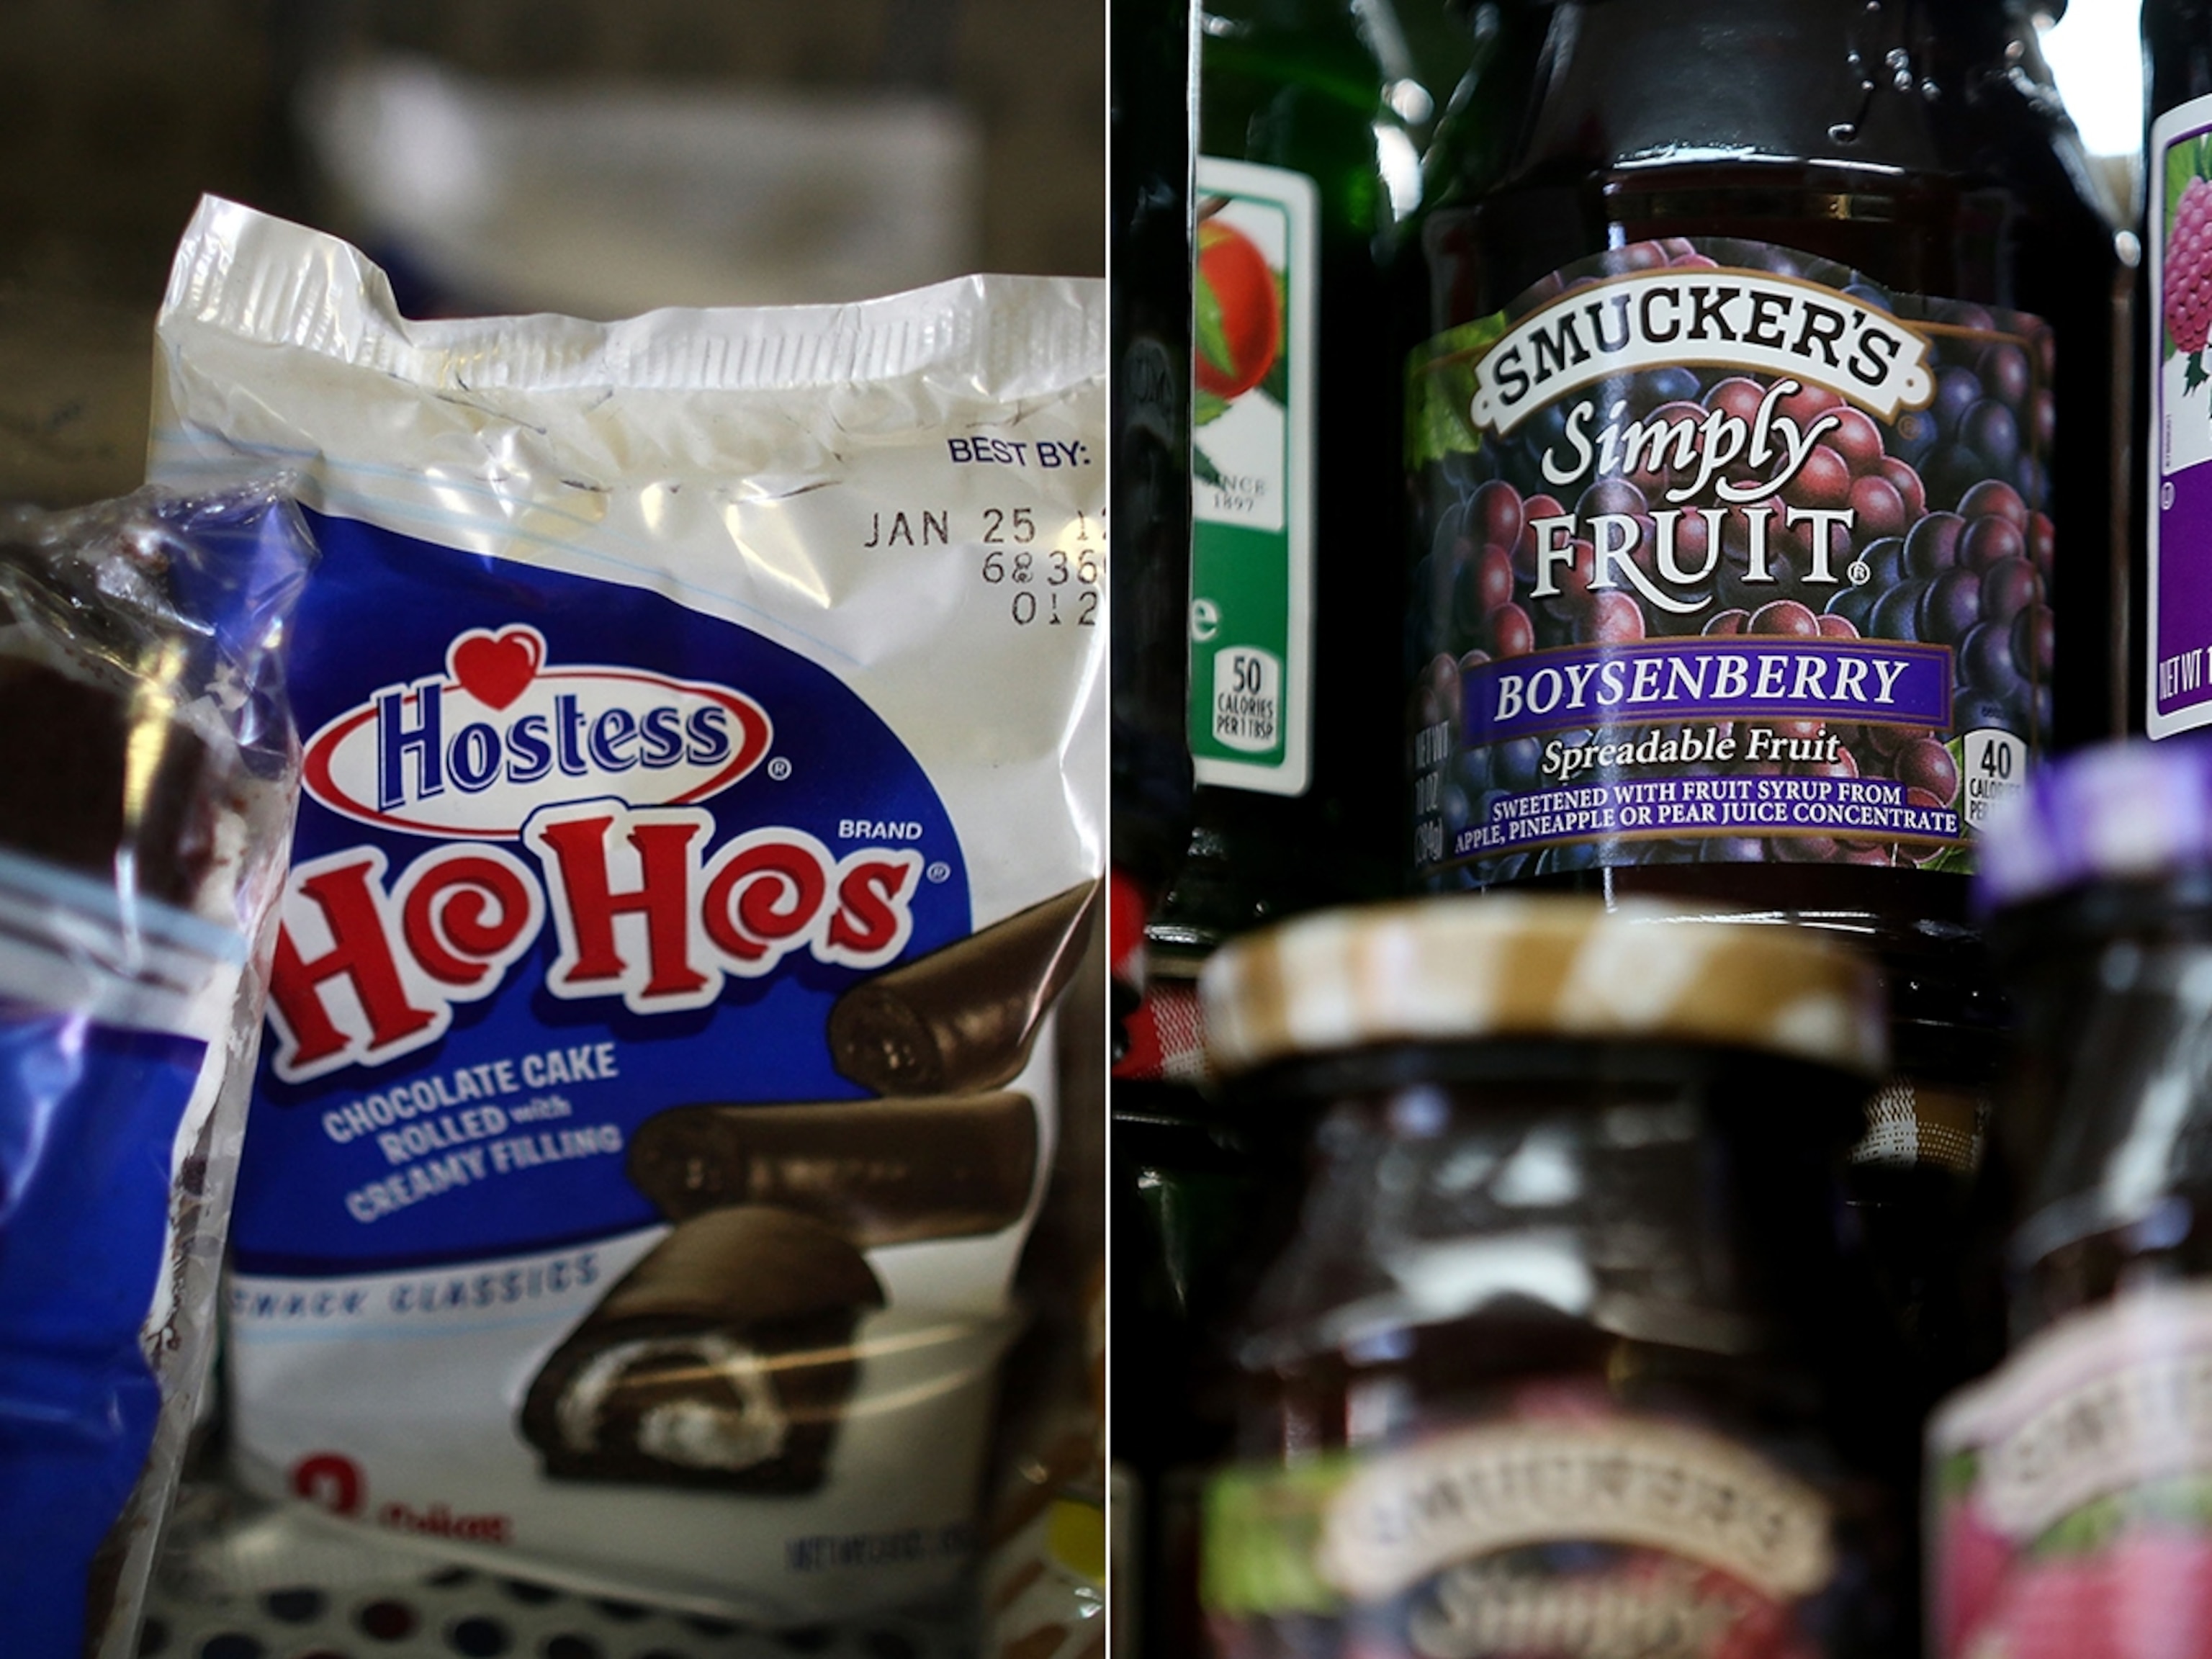 PHOTO: Hostess products are viewed on the shelf at a grocery store, Jan. 10, 2012, in New York. Smuckers fruit products are displayed on a shelf at a grocery store, June 5, 2014, in San Rafael, Calif.